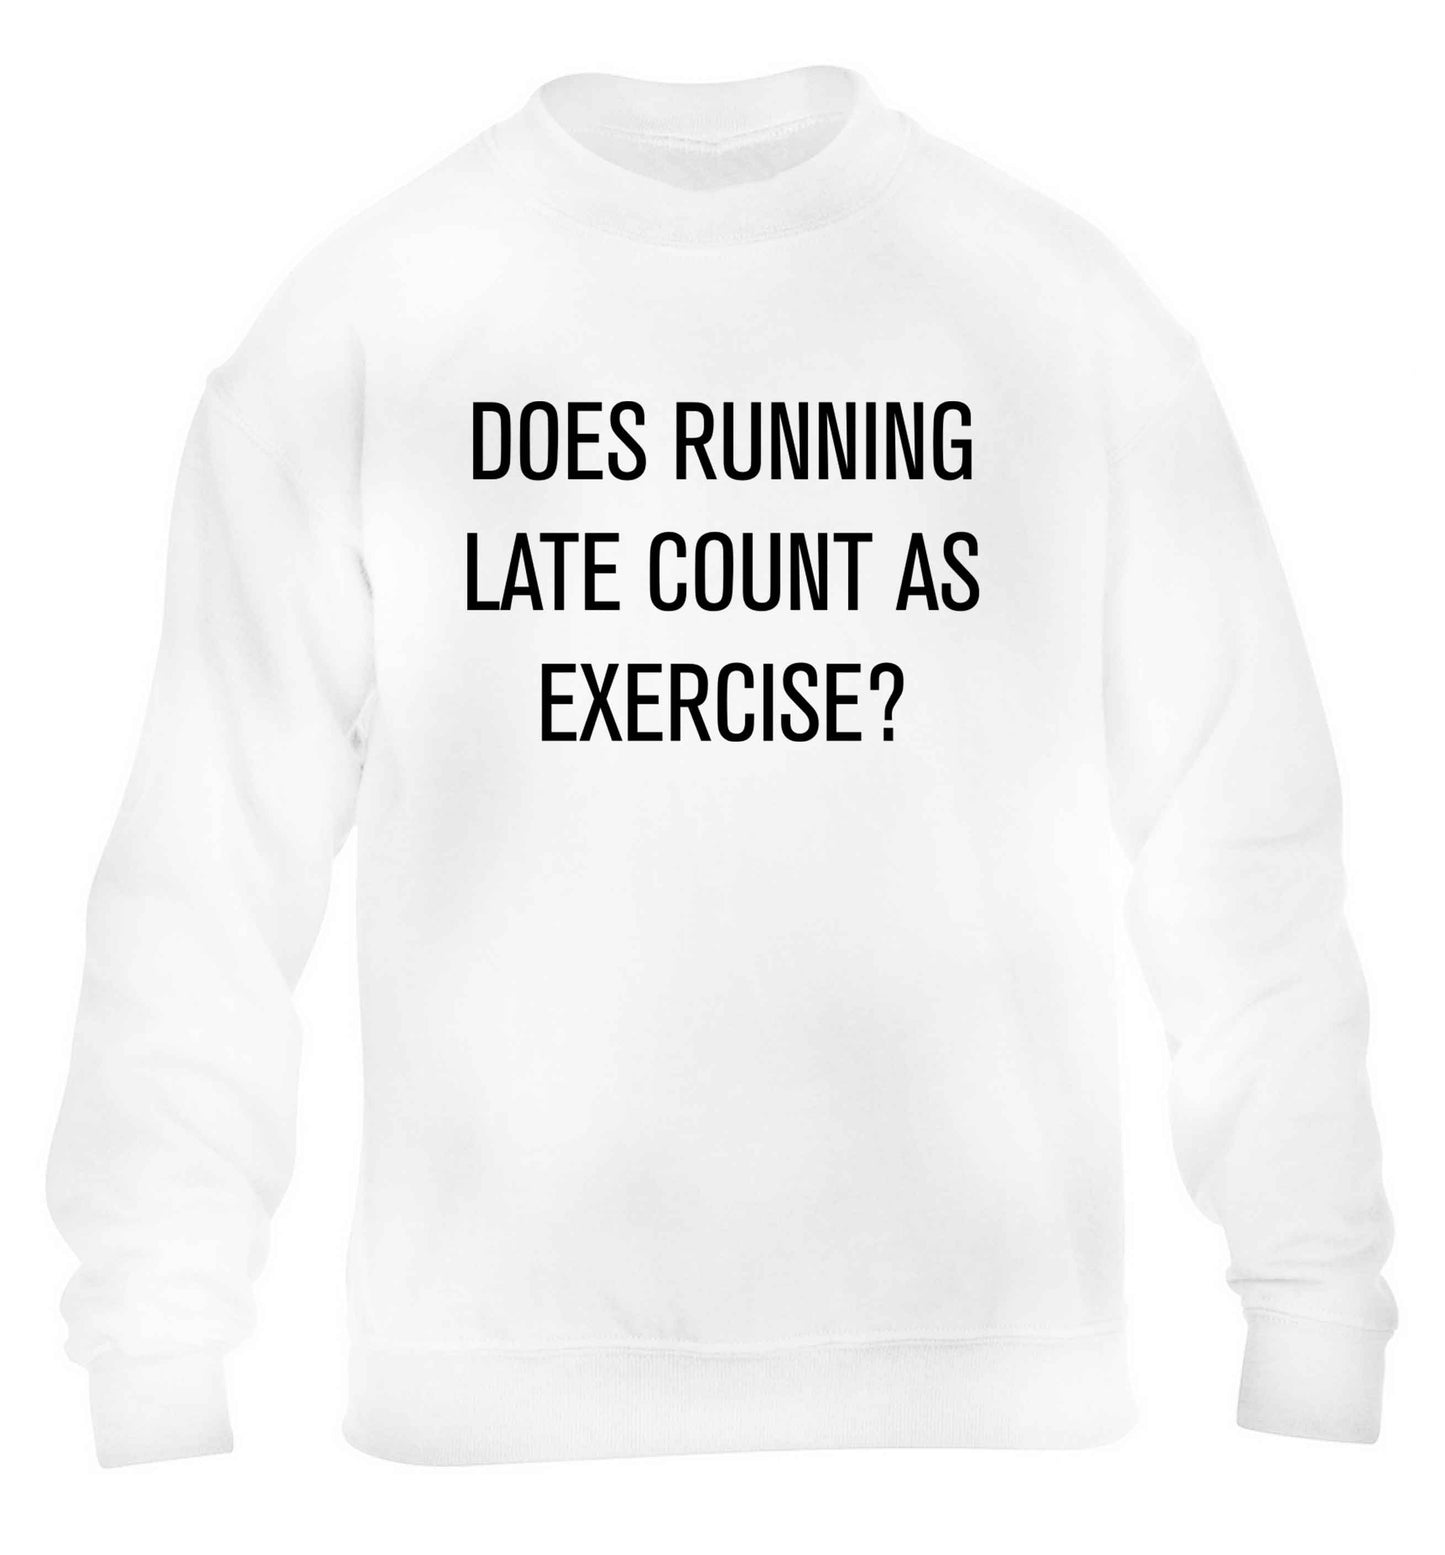 Does running late count as exercise? children's white sweater 12-13 Years